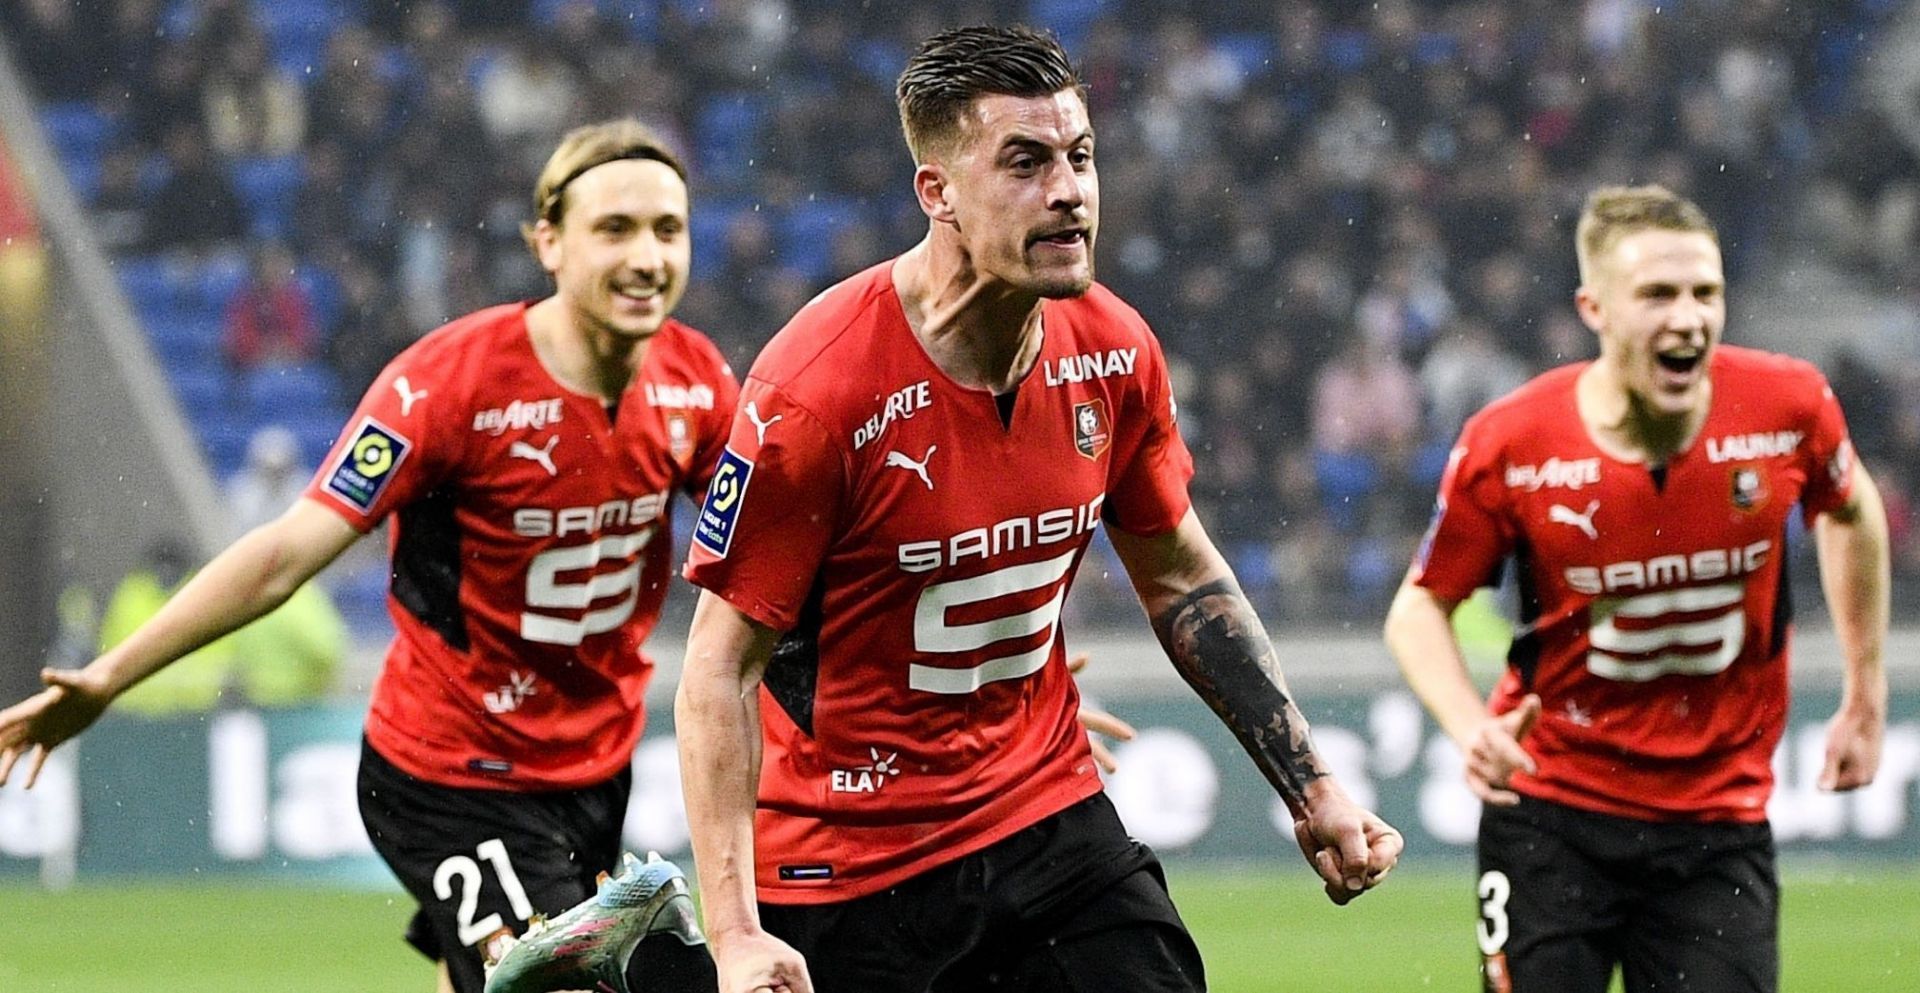 Rennes will take on Toulouse in Ligue 1 on Saturday